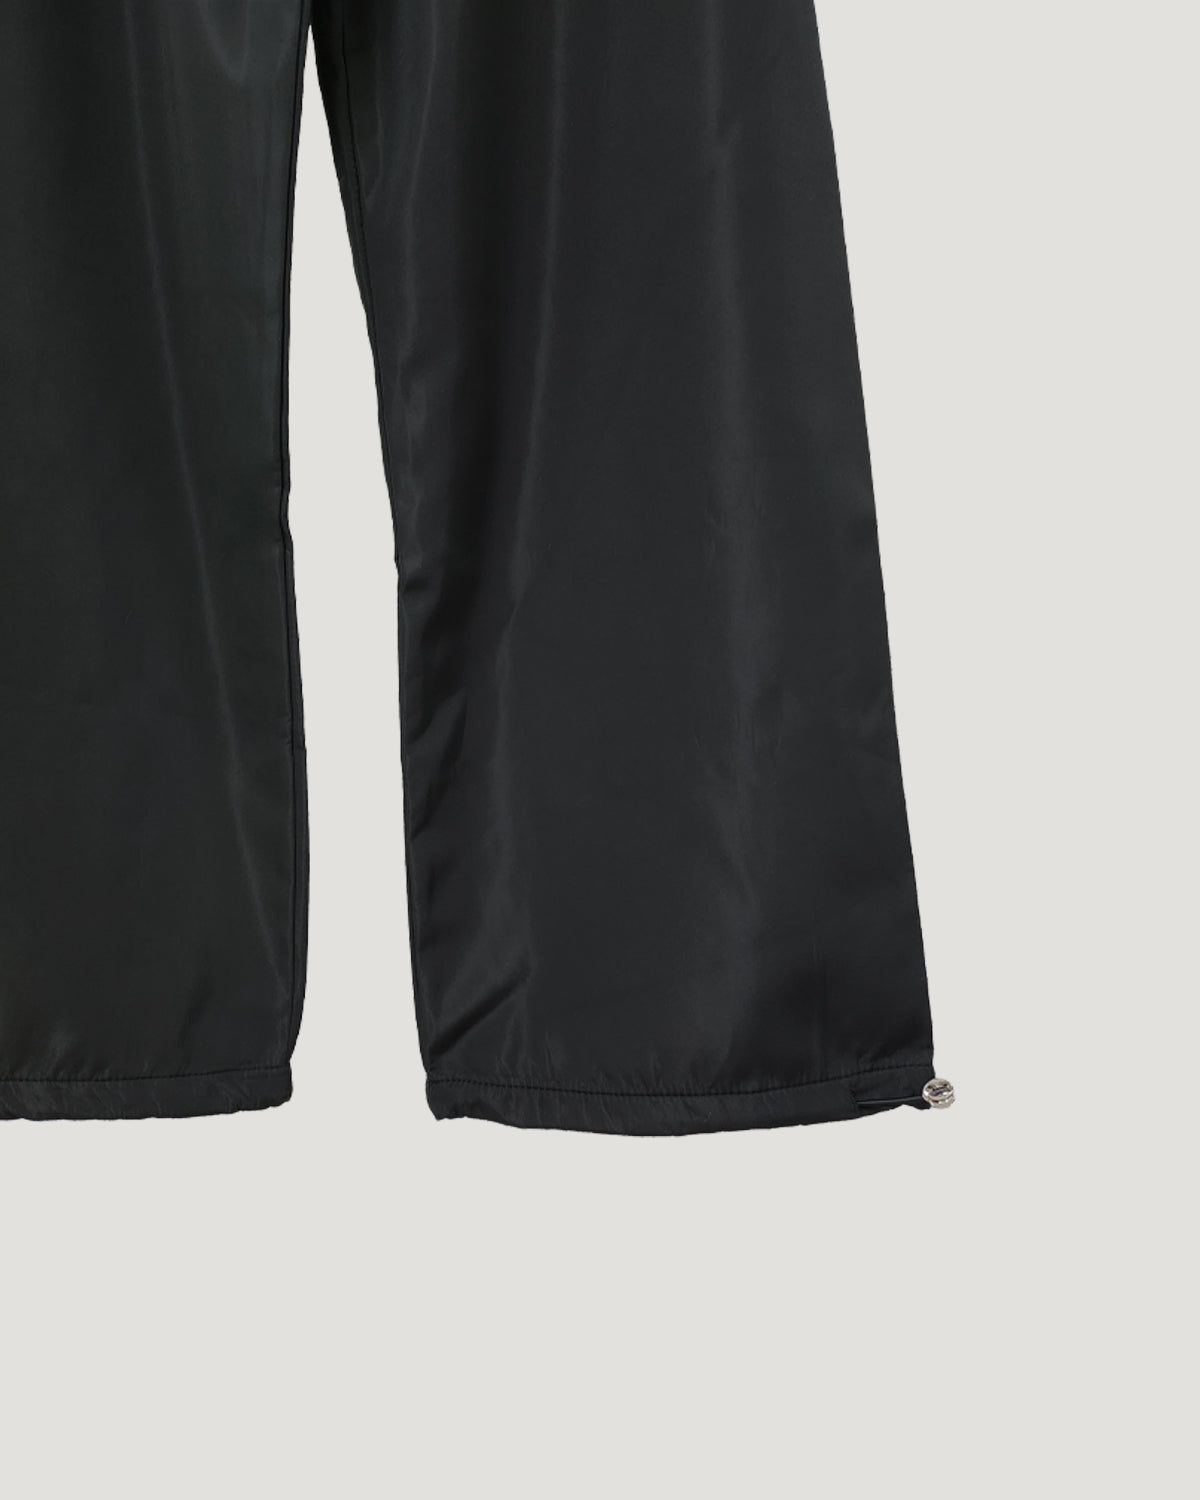 multiway frill pants